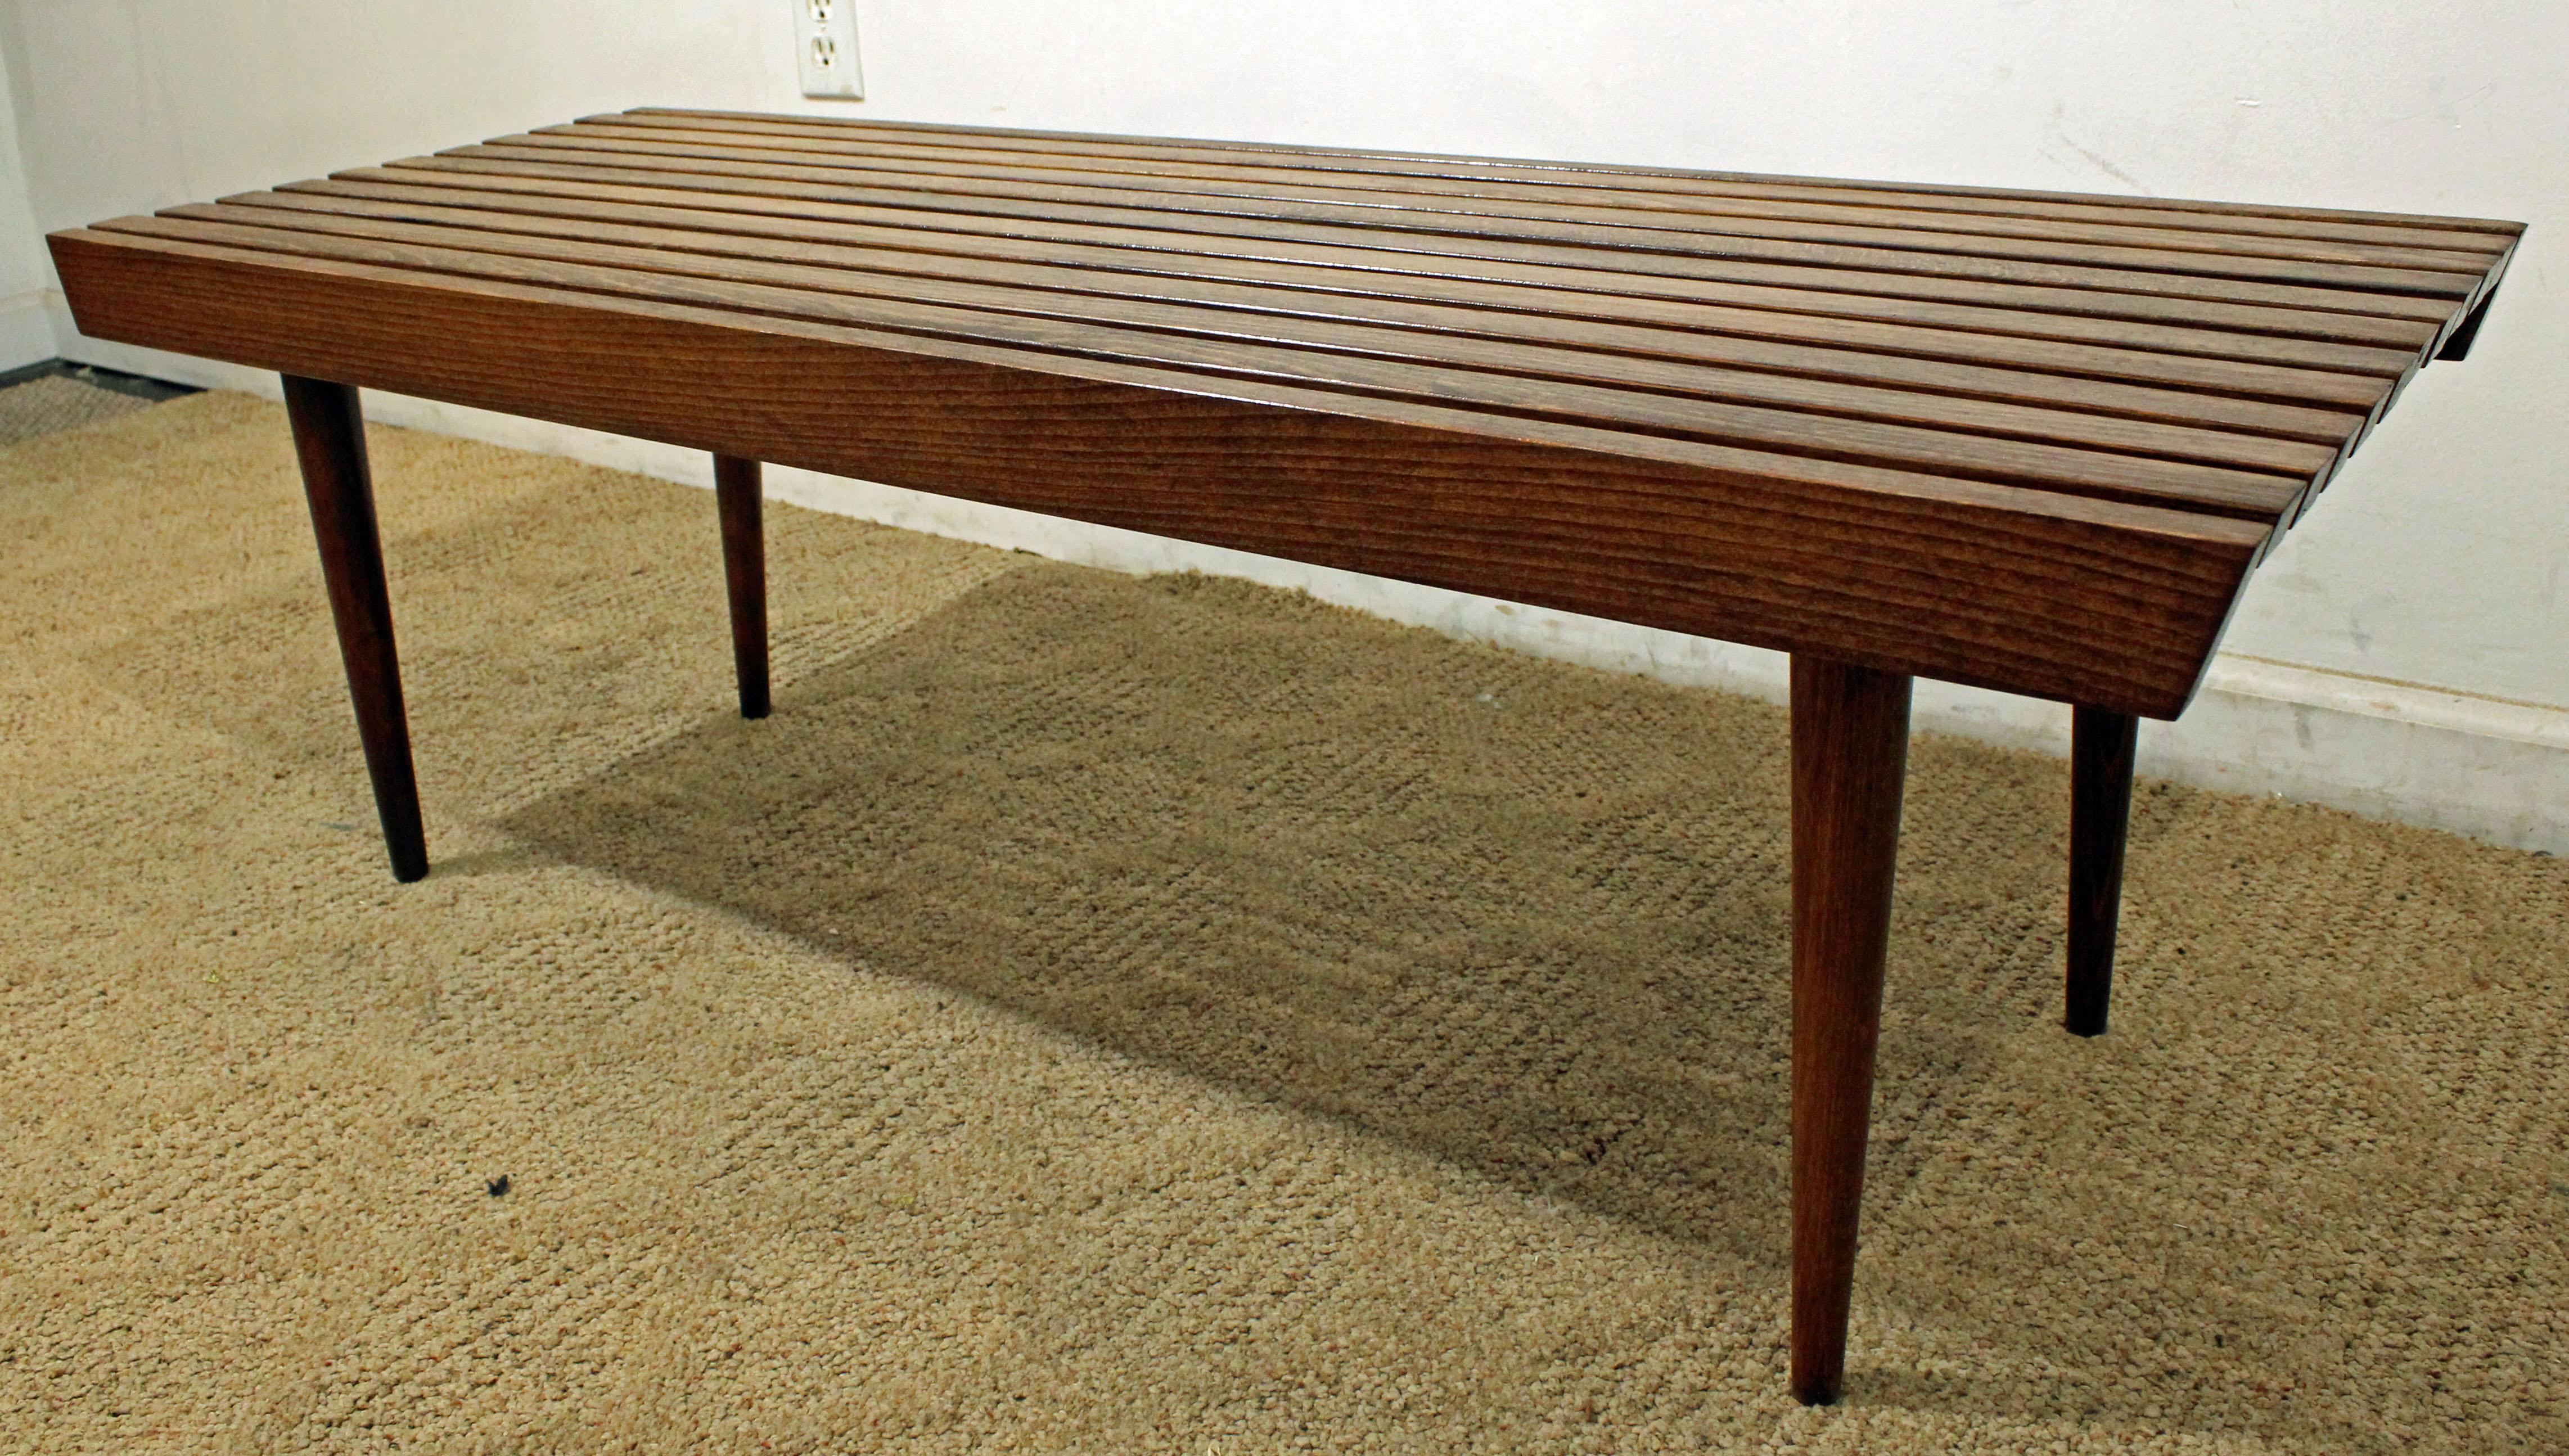 What a find. Offered is a Mid-Century Modern walnut slat bench coffee table. It has a nice look and simple lines. The piece shows minor wear. It is not signed. 

Dimensions: 
48